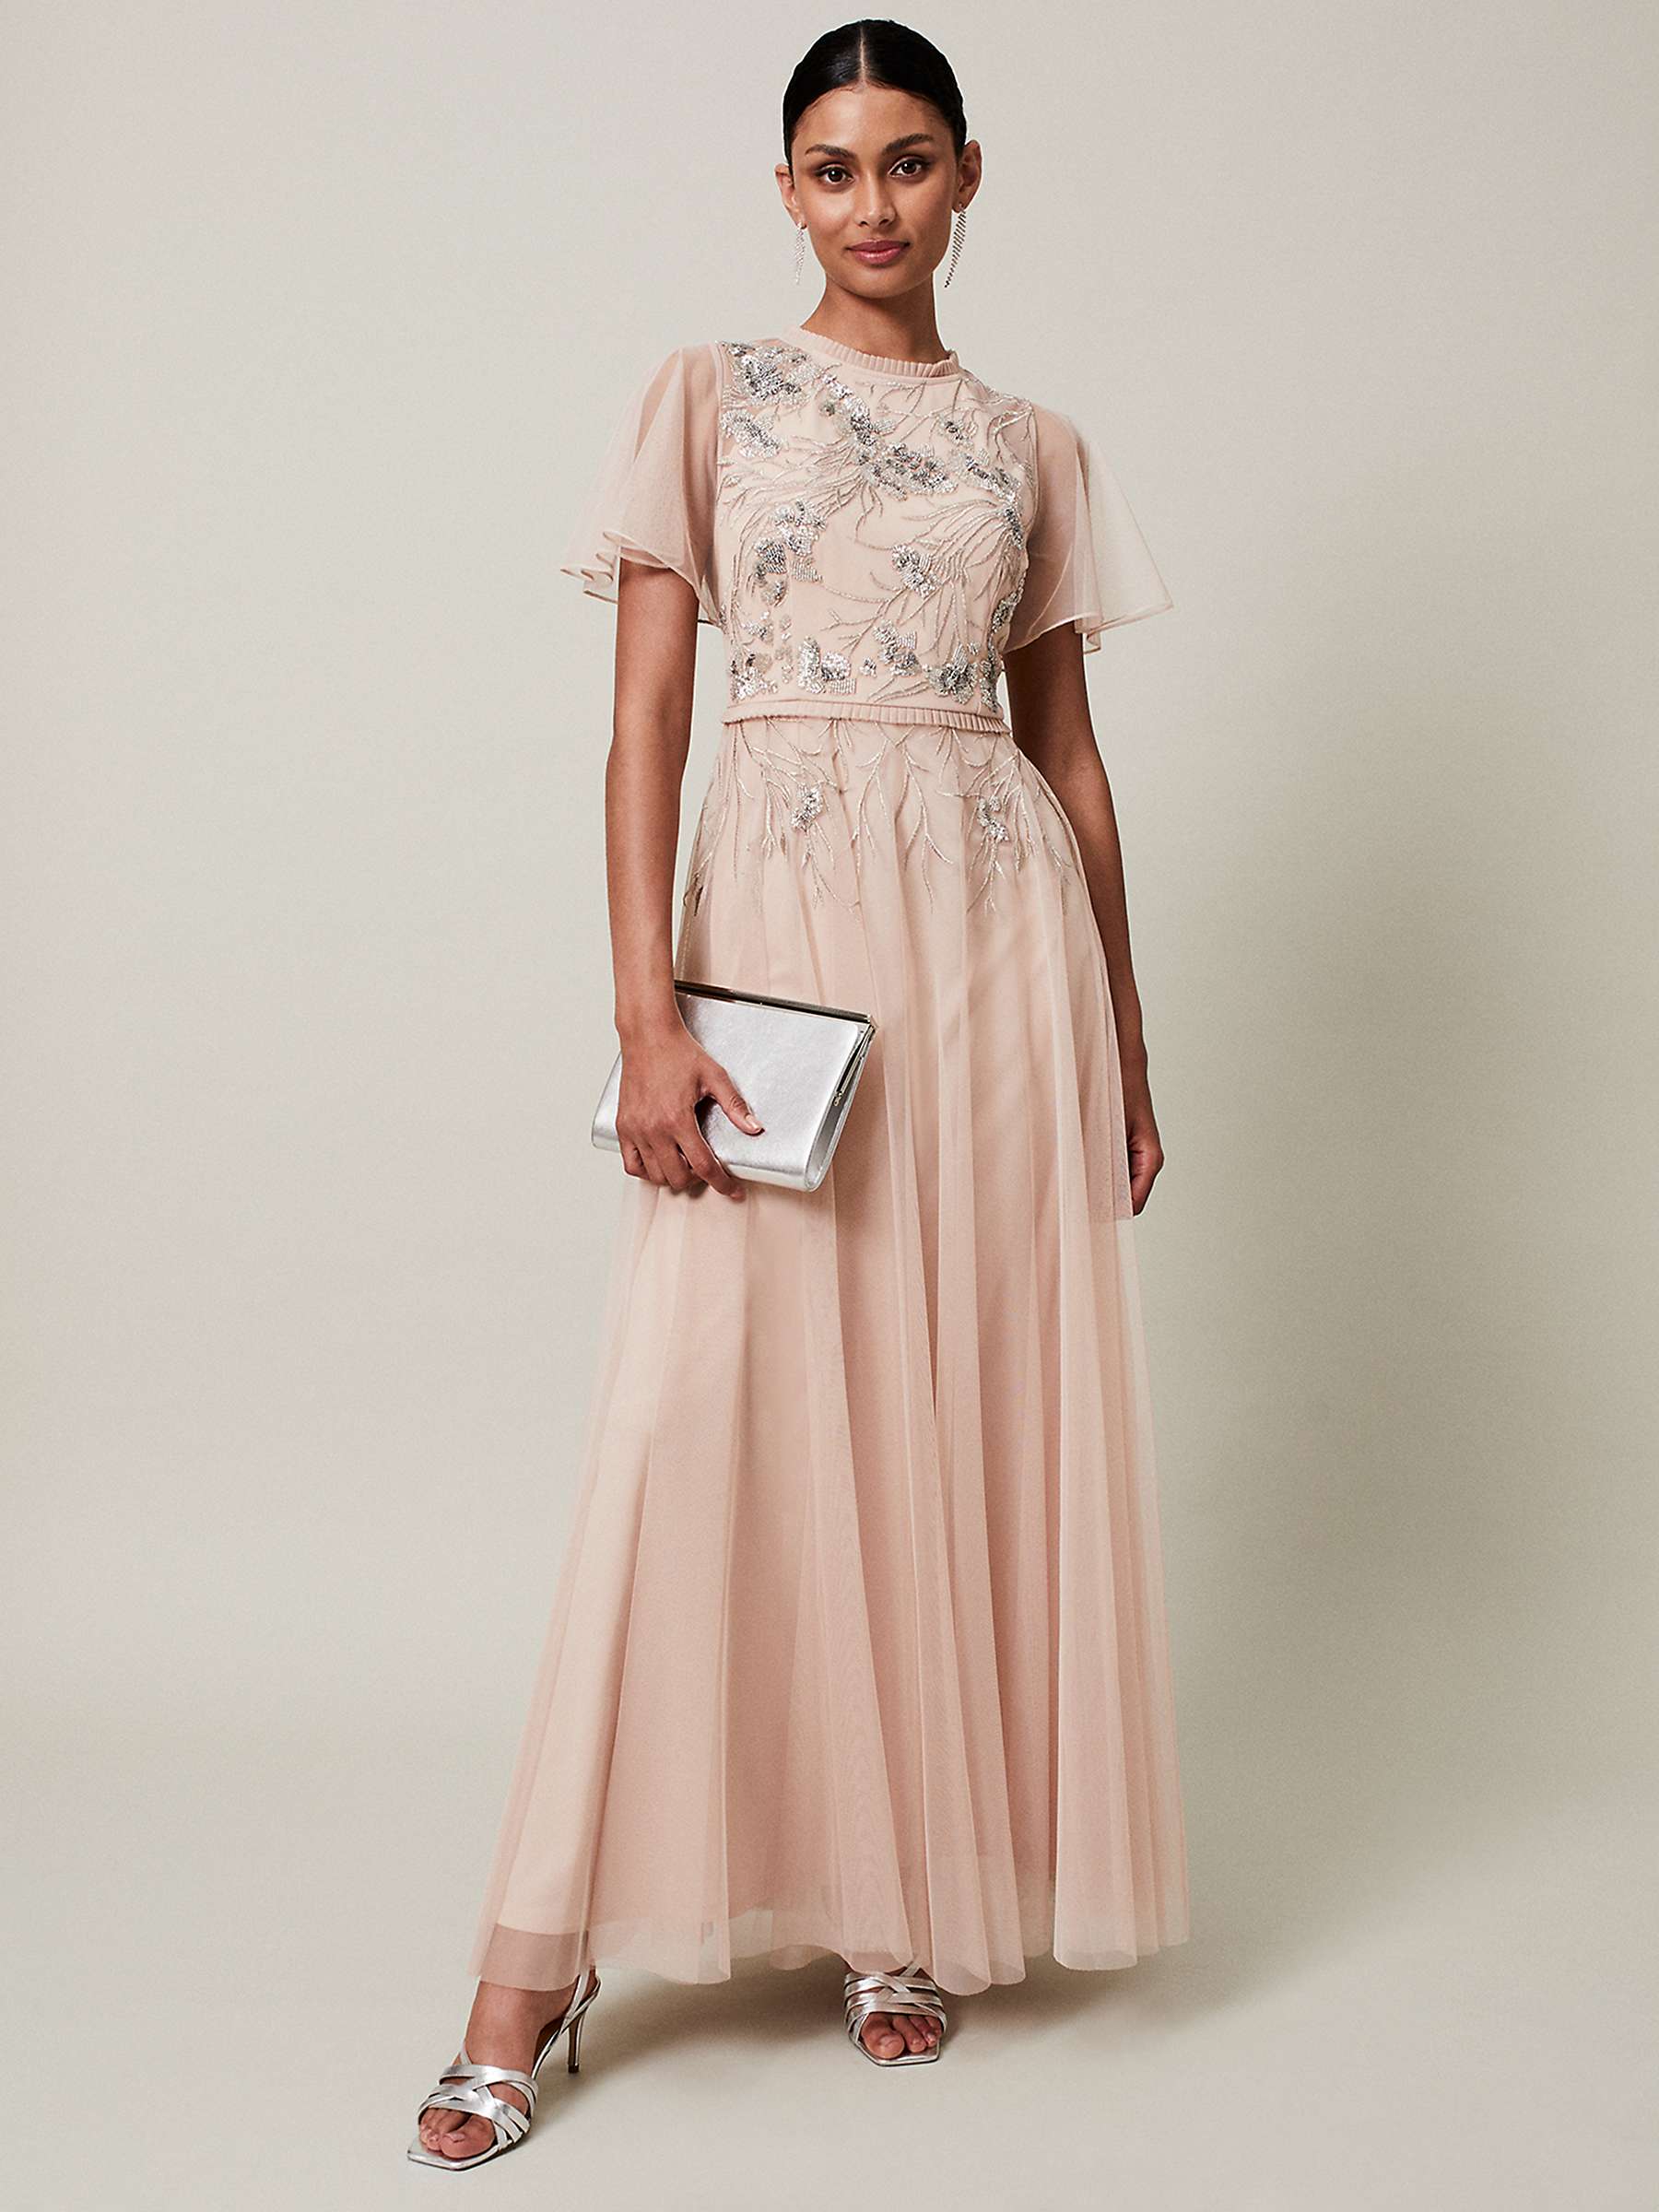 Buy Phase Eight Zena Beaded Tulle Maxi Dress, Pale Pink/Silver Online at johnlewis.com